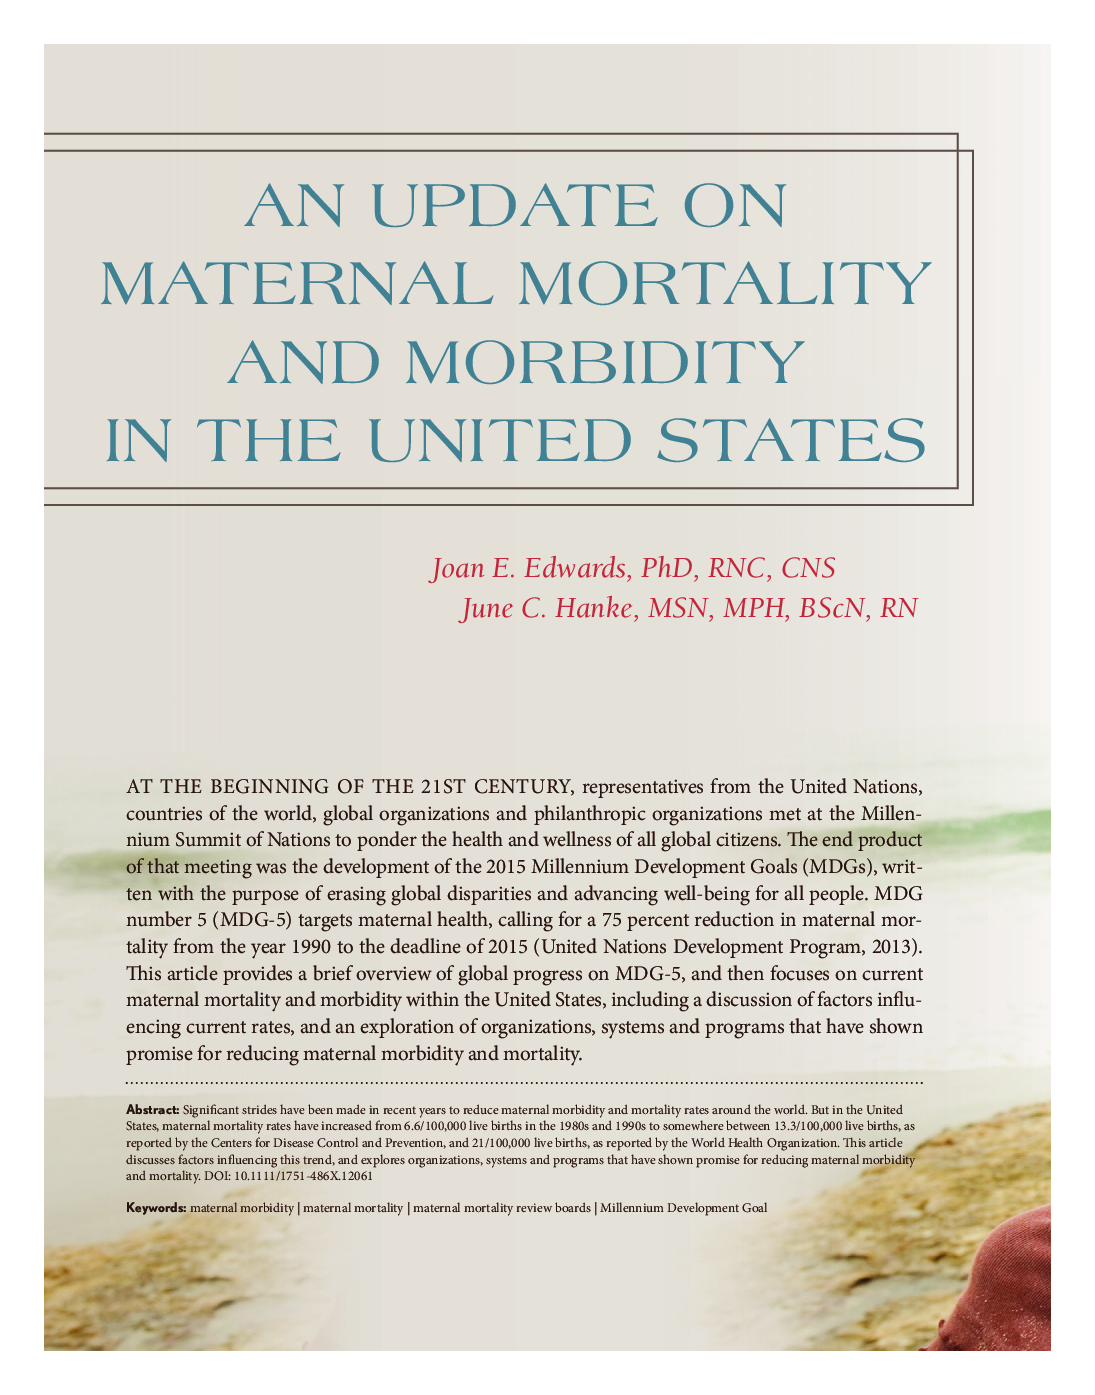 An Update on Maternal Mortality and Morbidity in the United States